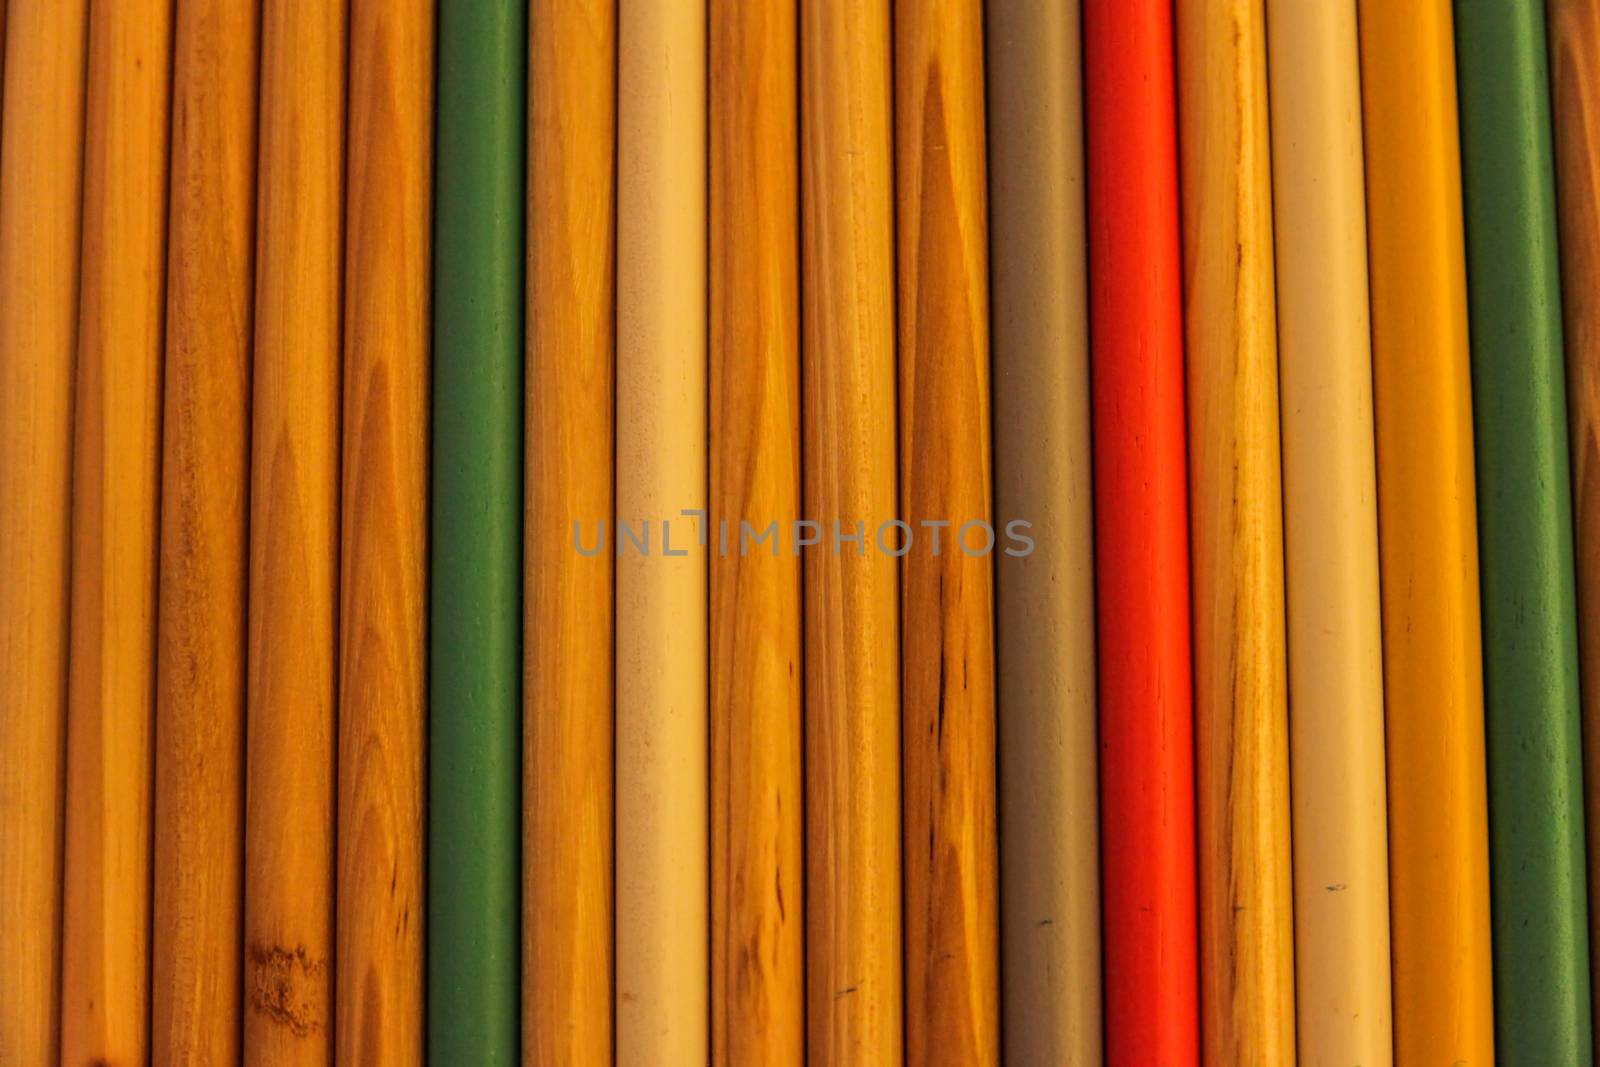 Close up of colored wooden drum sticks arranged in a row